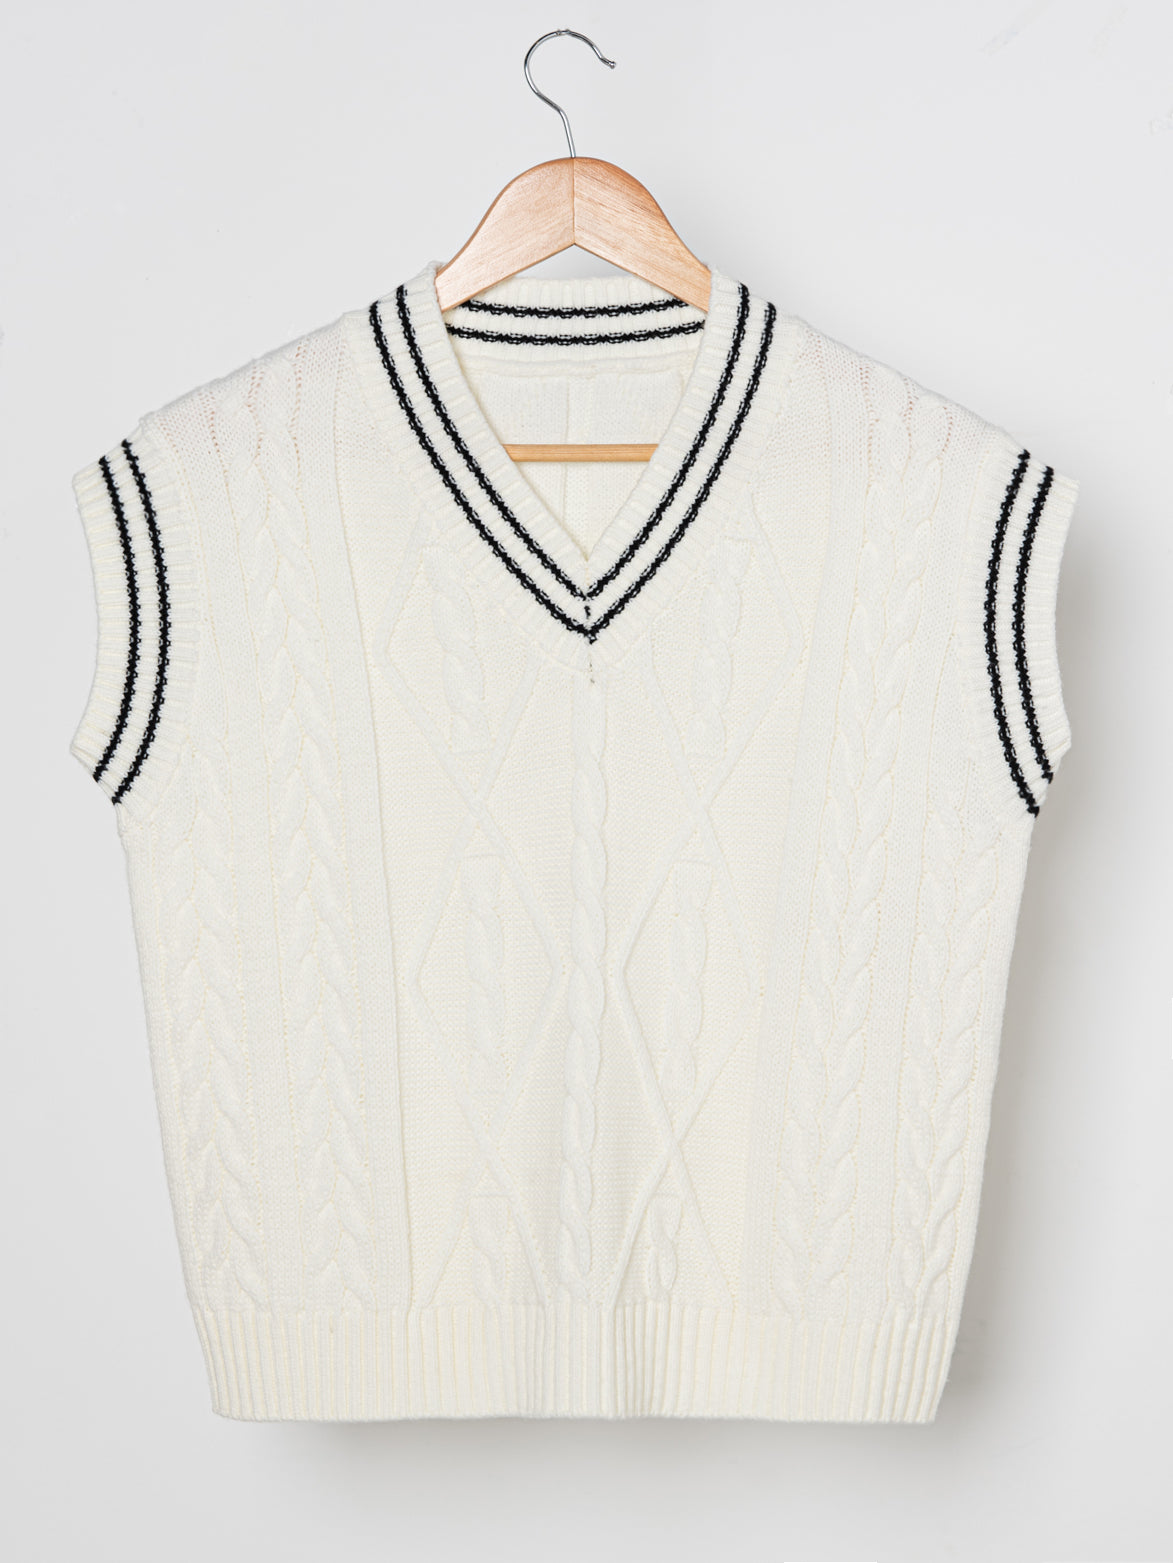 Cable Knit Sweater Vest Sai Feel